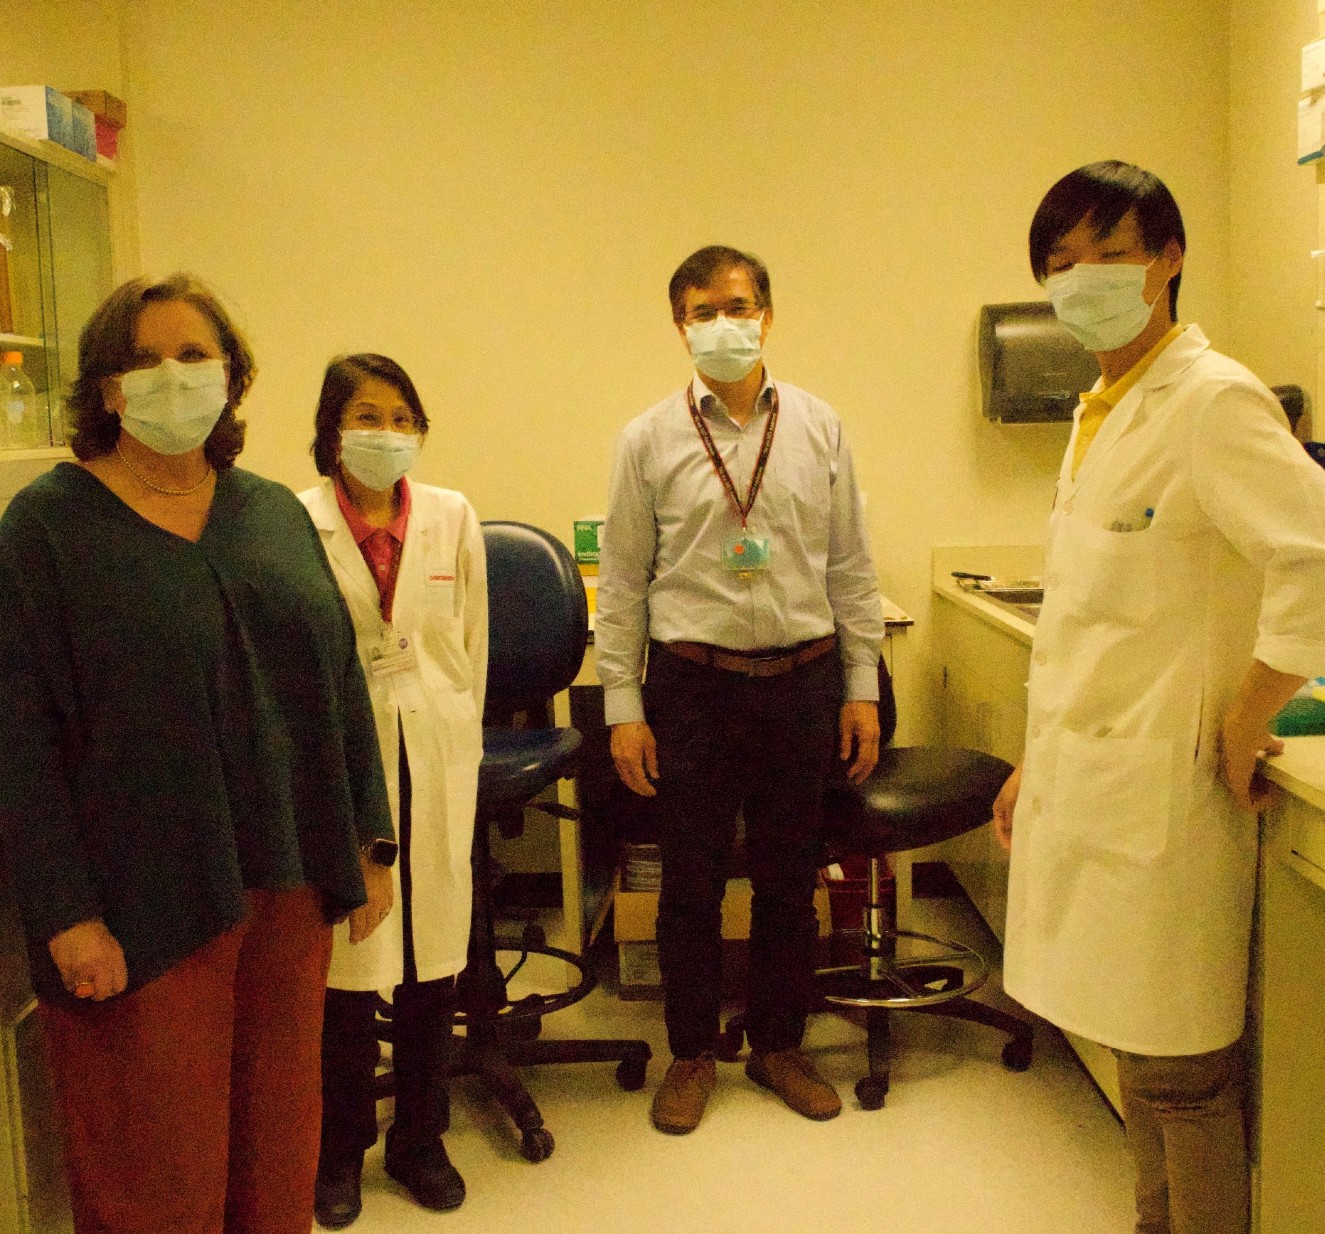 Nicole Andrews with Kwong K. Wong, Ph.D., professor of Gynecologic Oncology and Reproductive Medicine at The University of Texas MD Anderson Cancer Center, and his team in his lab